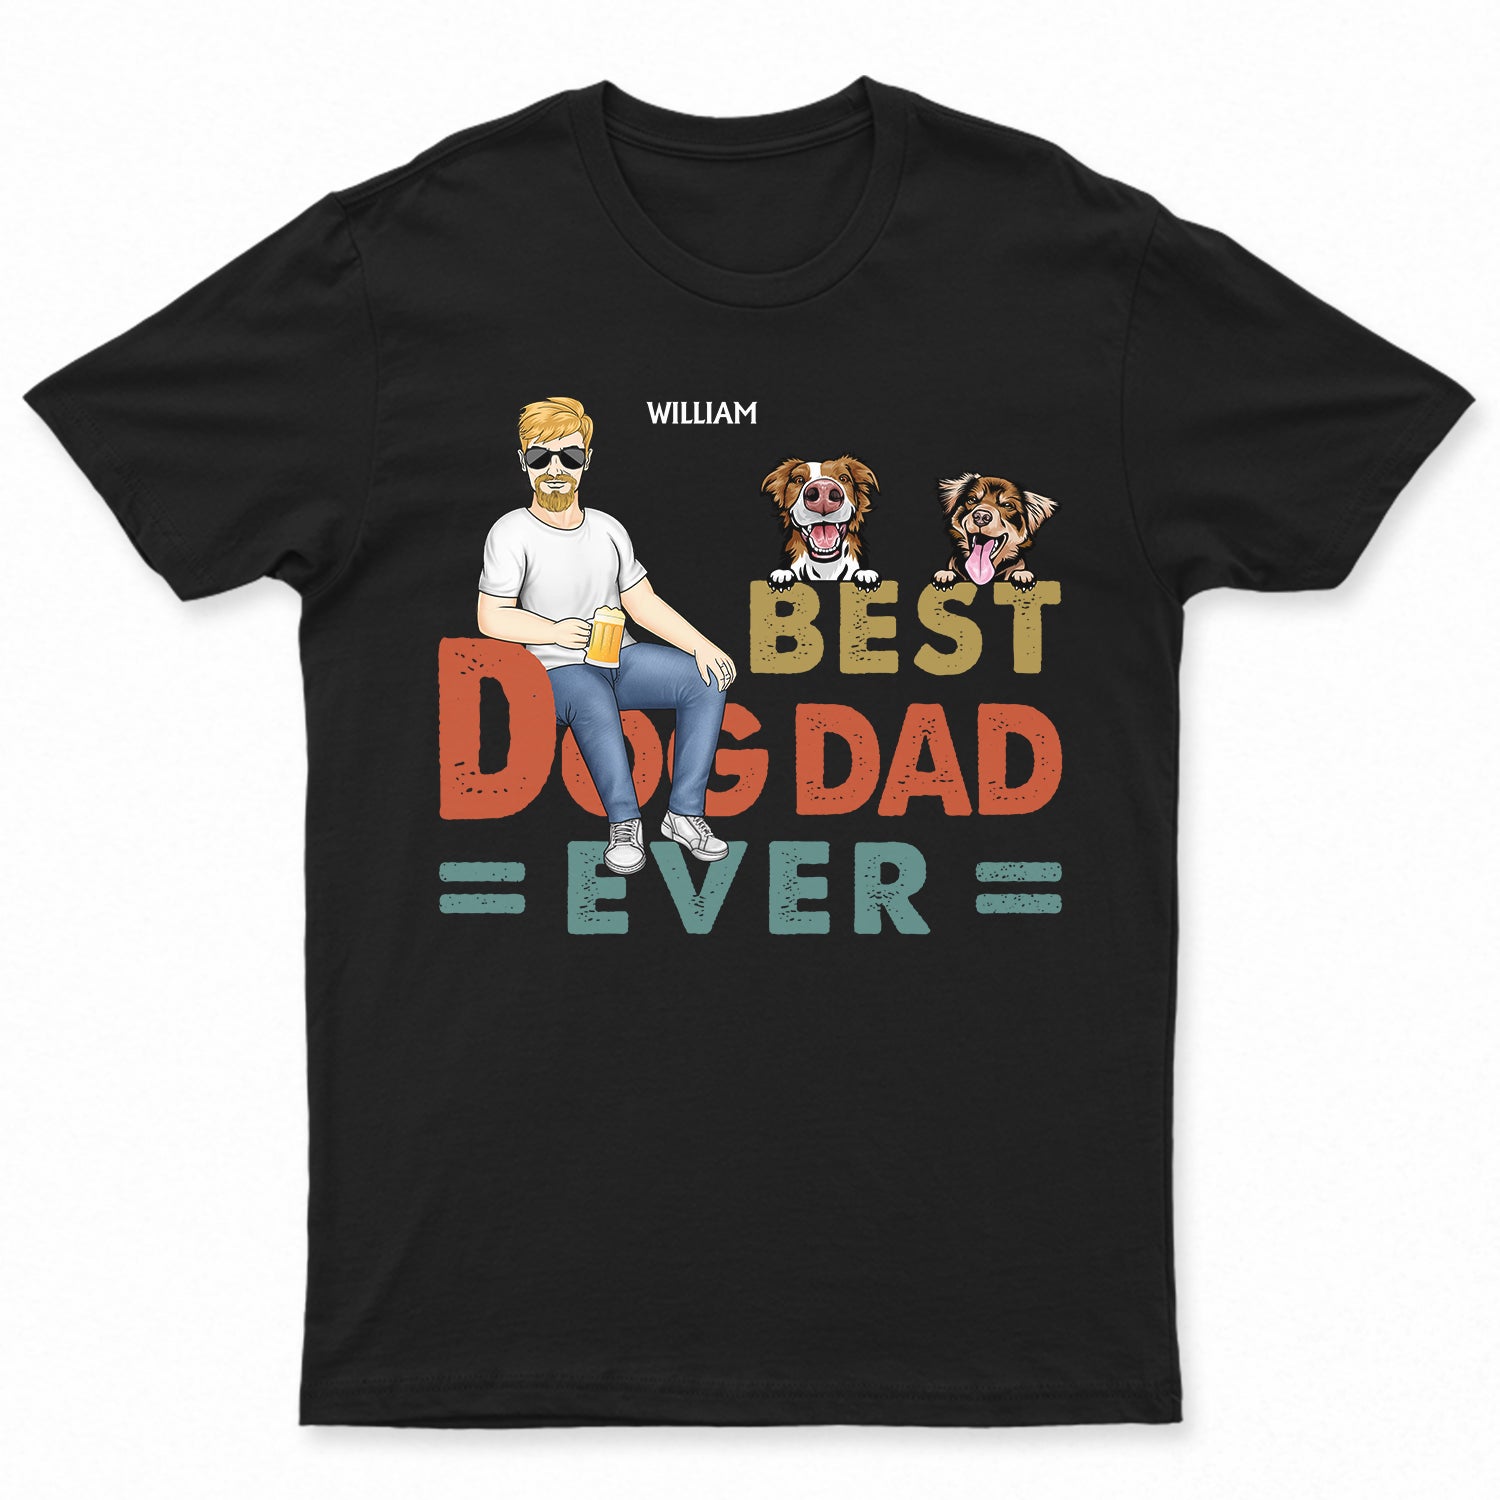 Best Dog Cat Dad Ever - Birthday Gift For Dad, Grandpa, Pet Lovers - Personalized Custom T Shirt